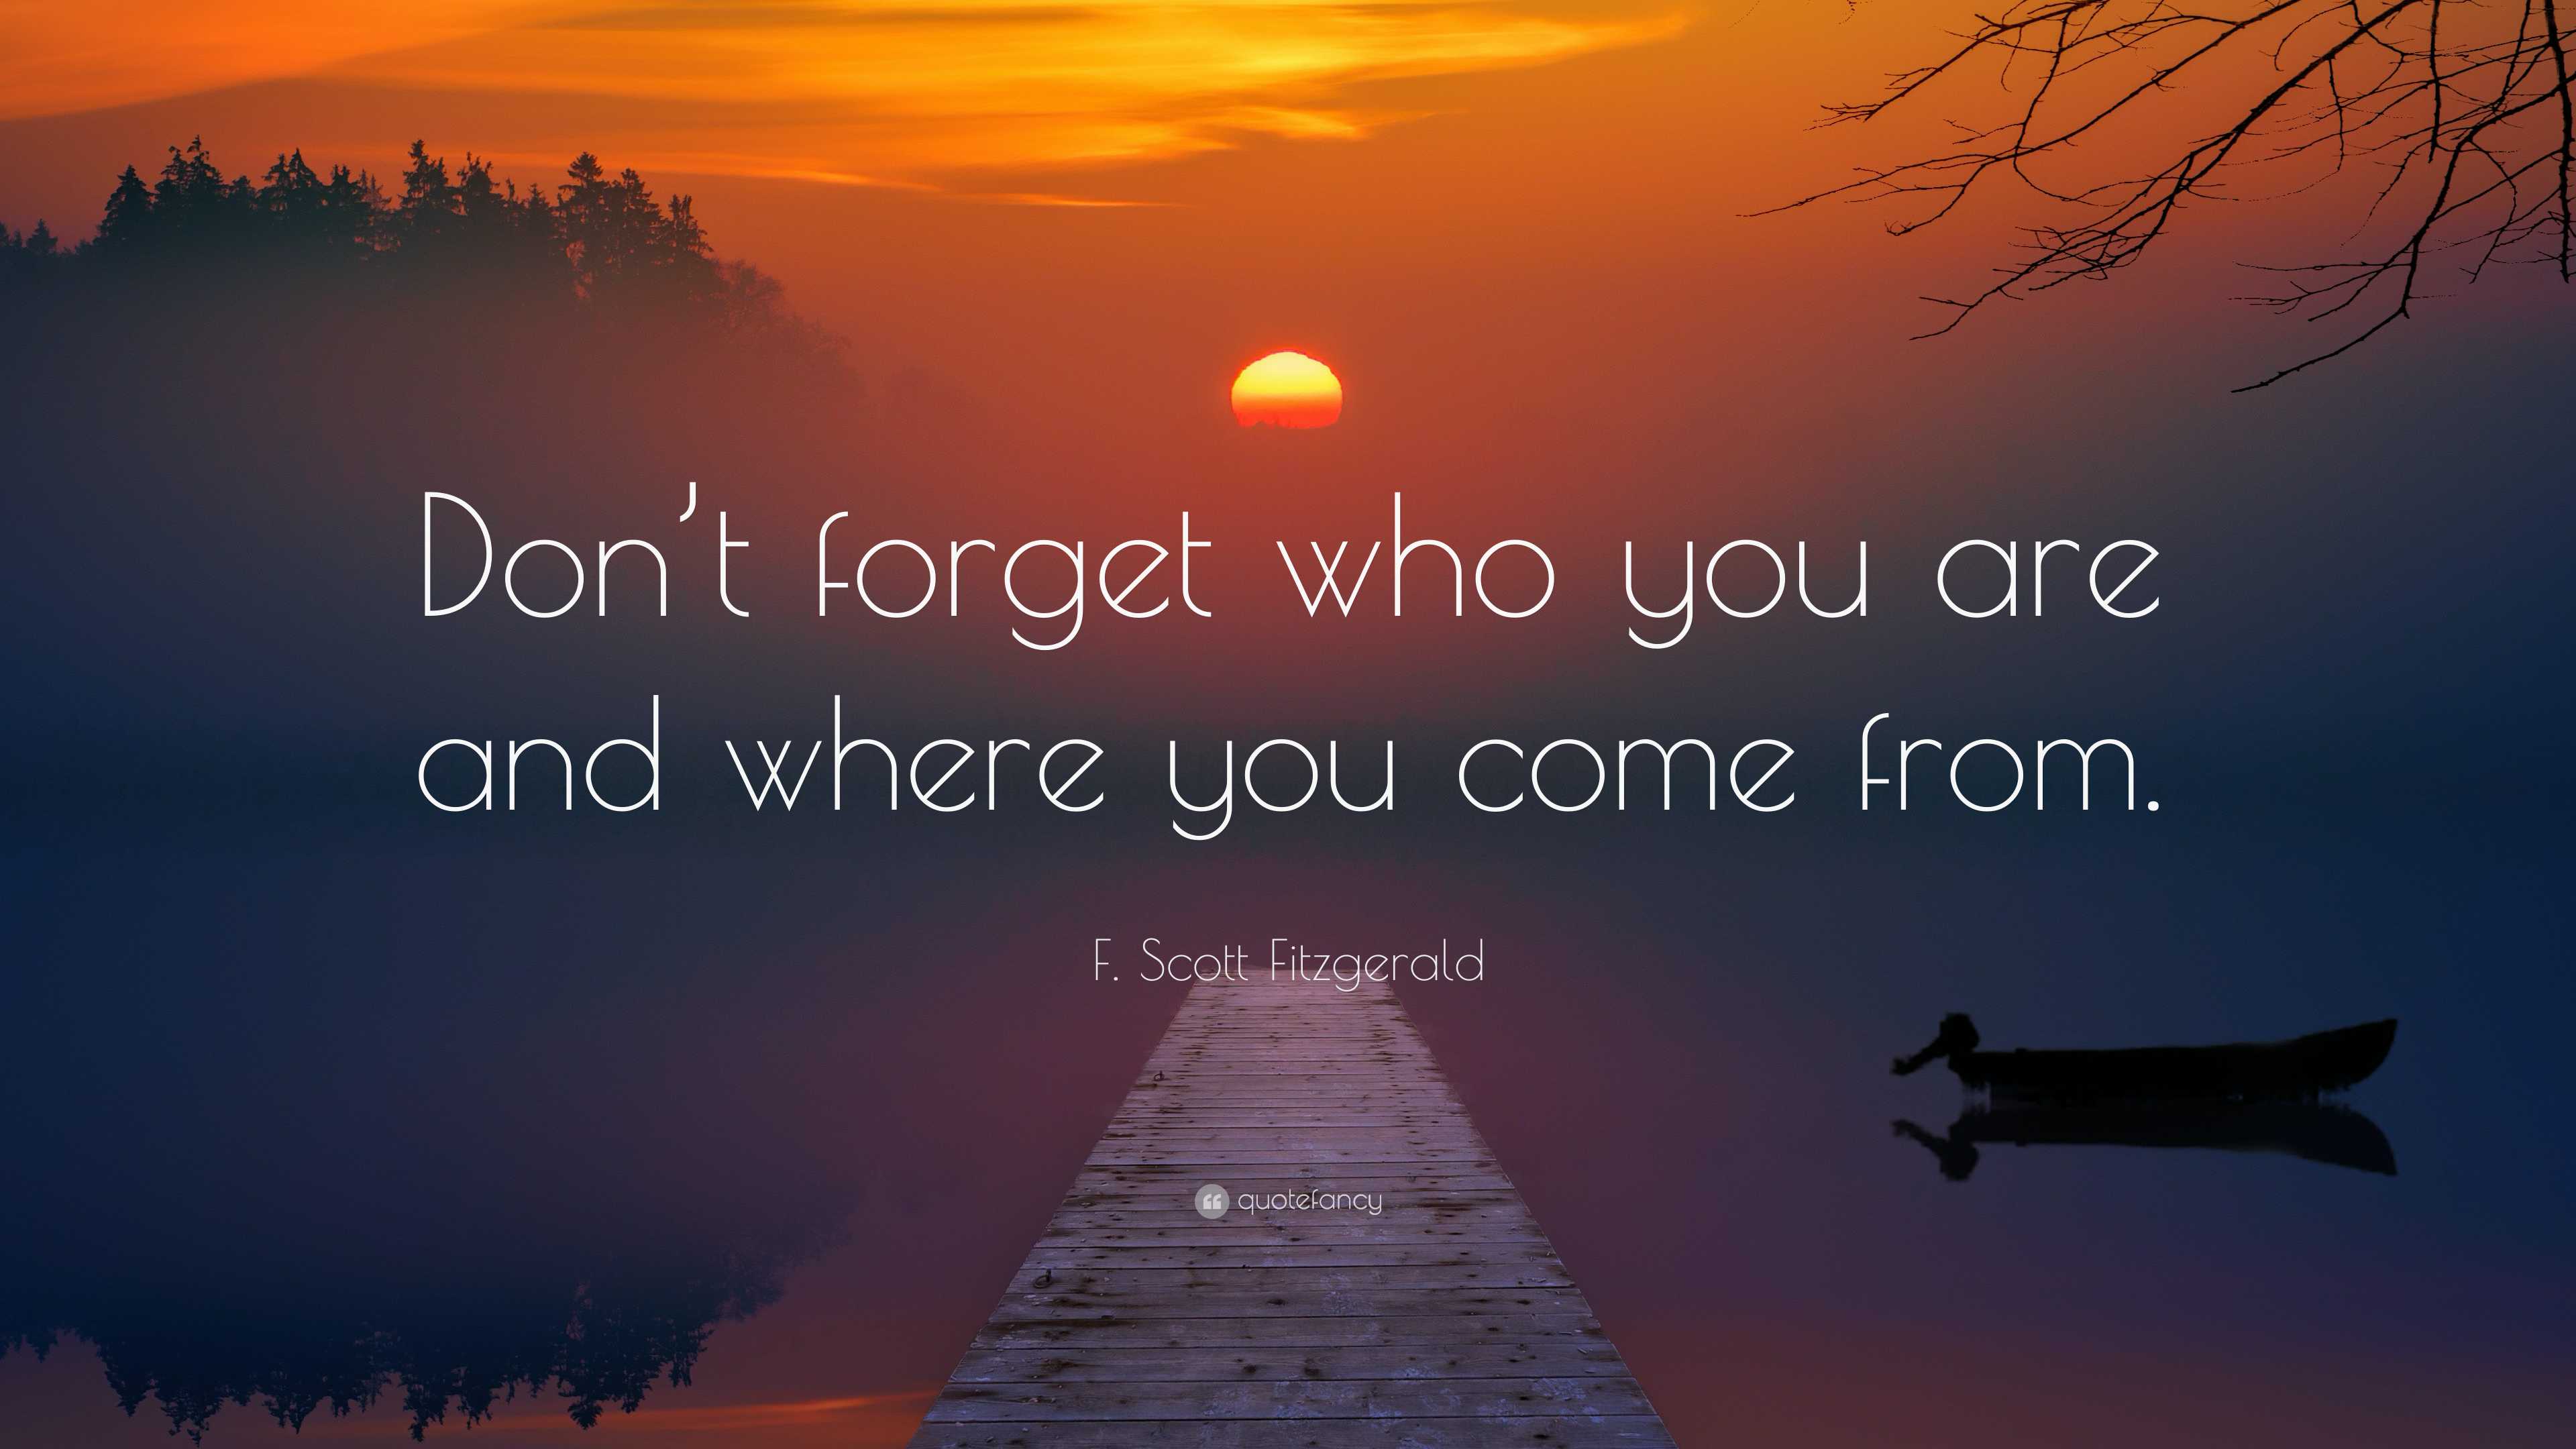 F. Scott Fitzgerald Quote: “Don’t forget who you are and where you come ...